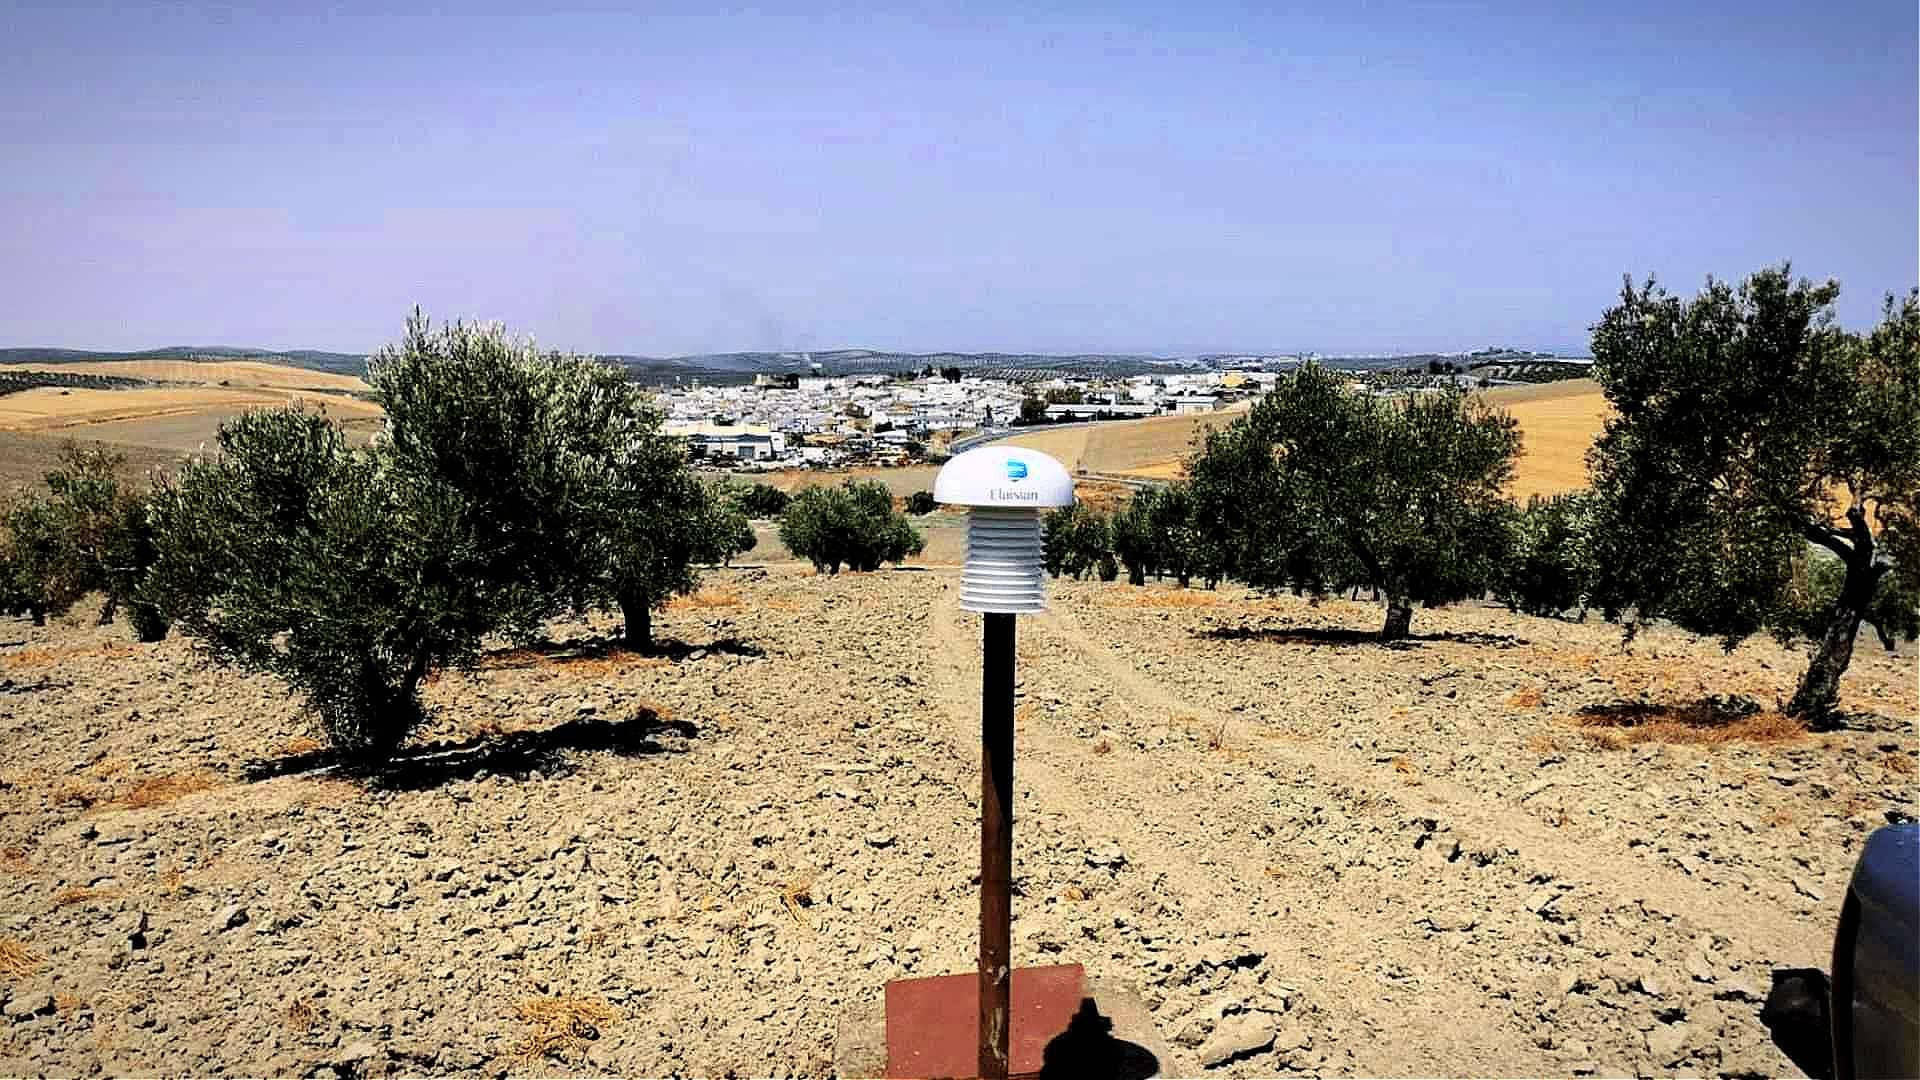 briefs-production-puglia-invests-in-early-detection-of-olive-tree-diseases-and-pests-olive-oil-times